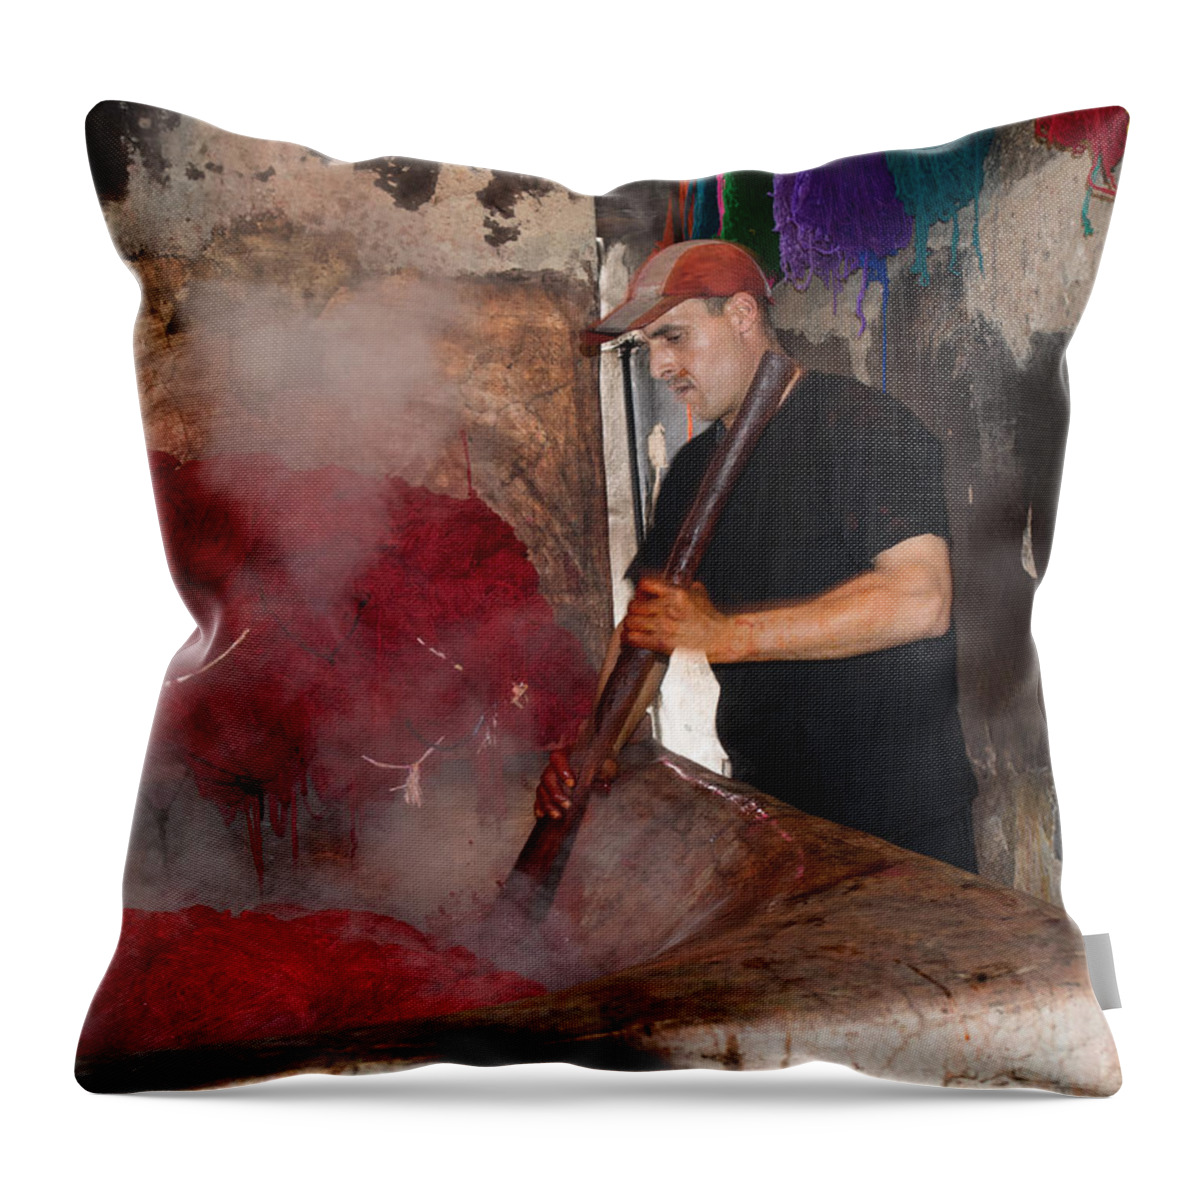 Photography Throw Pillow featuring the photograph Man Dyeing Wool In The Souk, Marrakesh by Panoramic Images